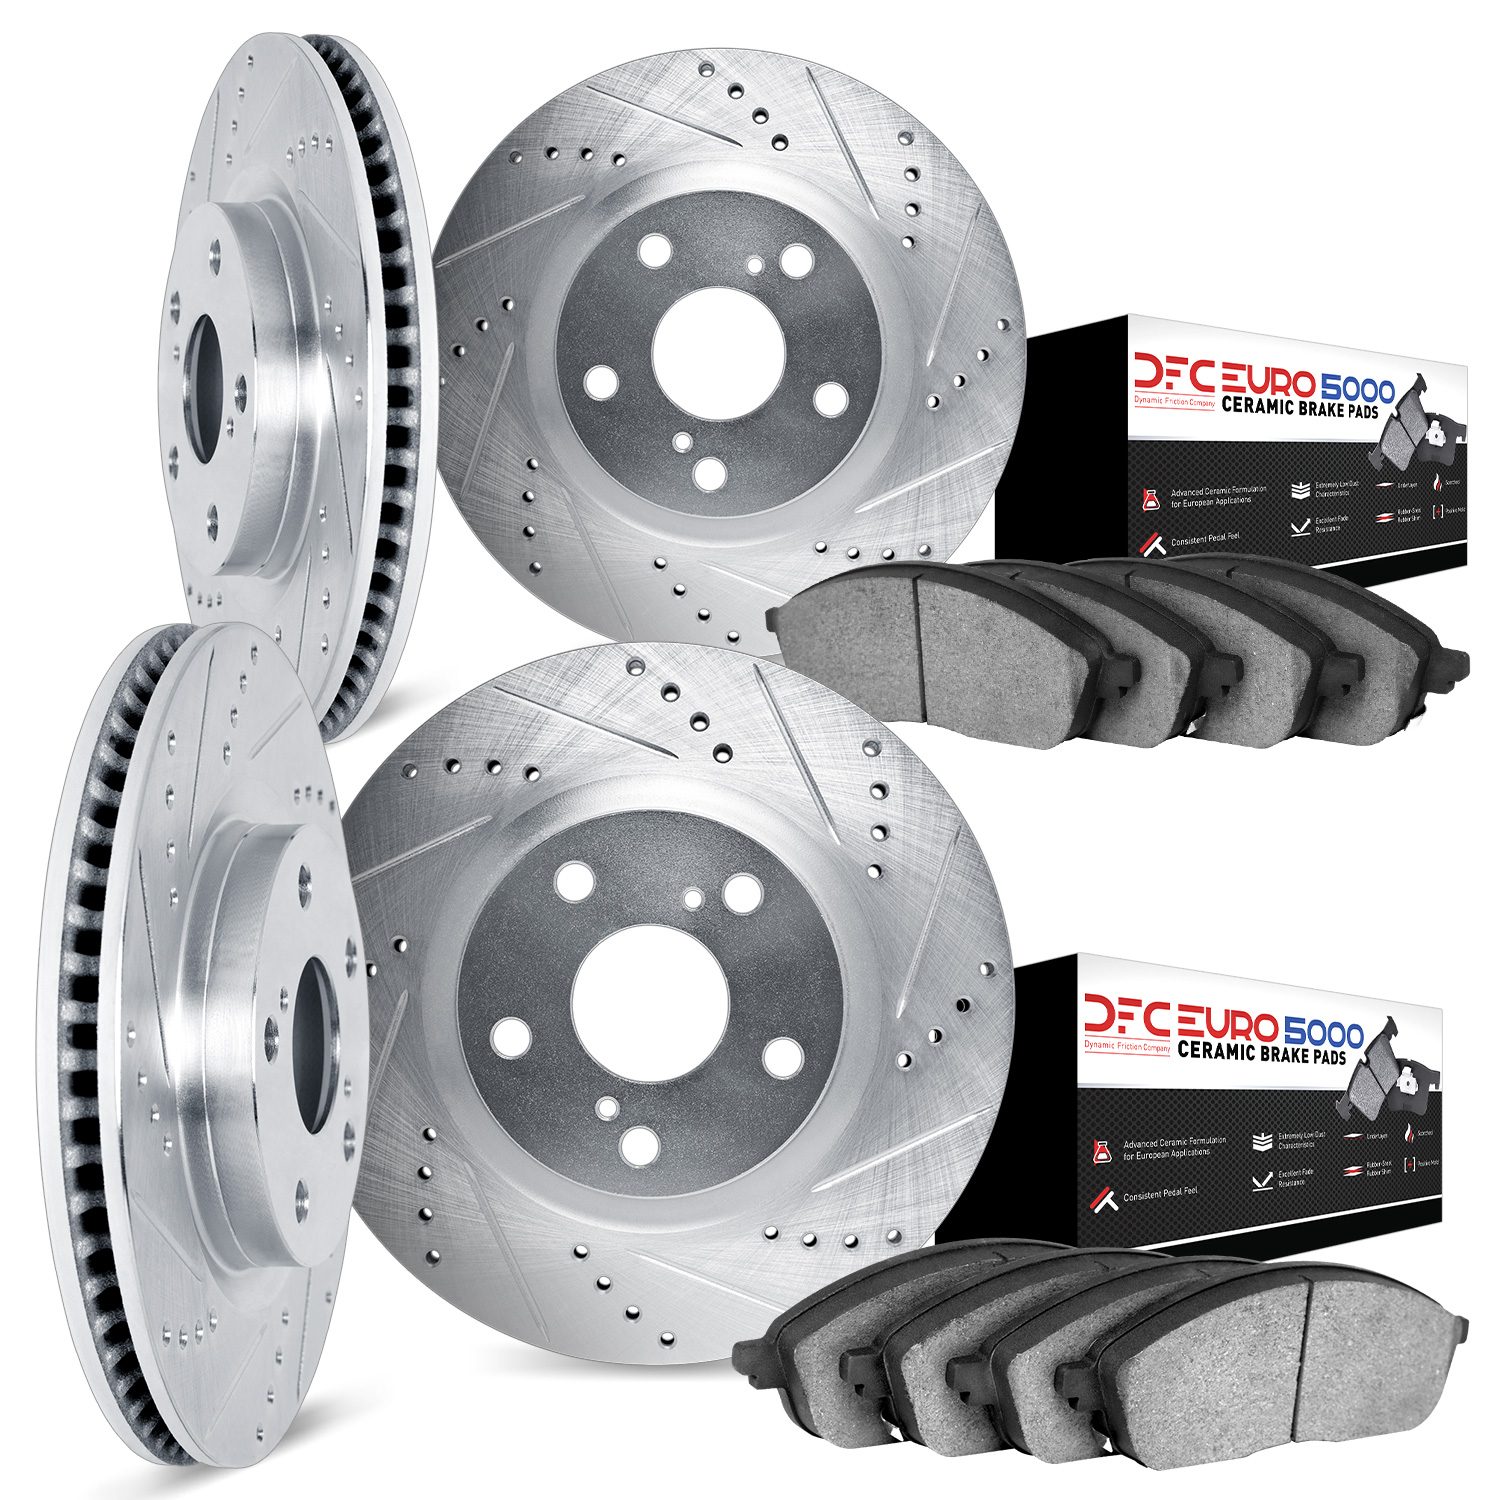 7604-67002 Drilled/Slotted Brake Rotors w/5000 Euro Ceramic Brake Pads Kit [Silver], 2009-2016 Renault, Position: Front and Rear